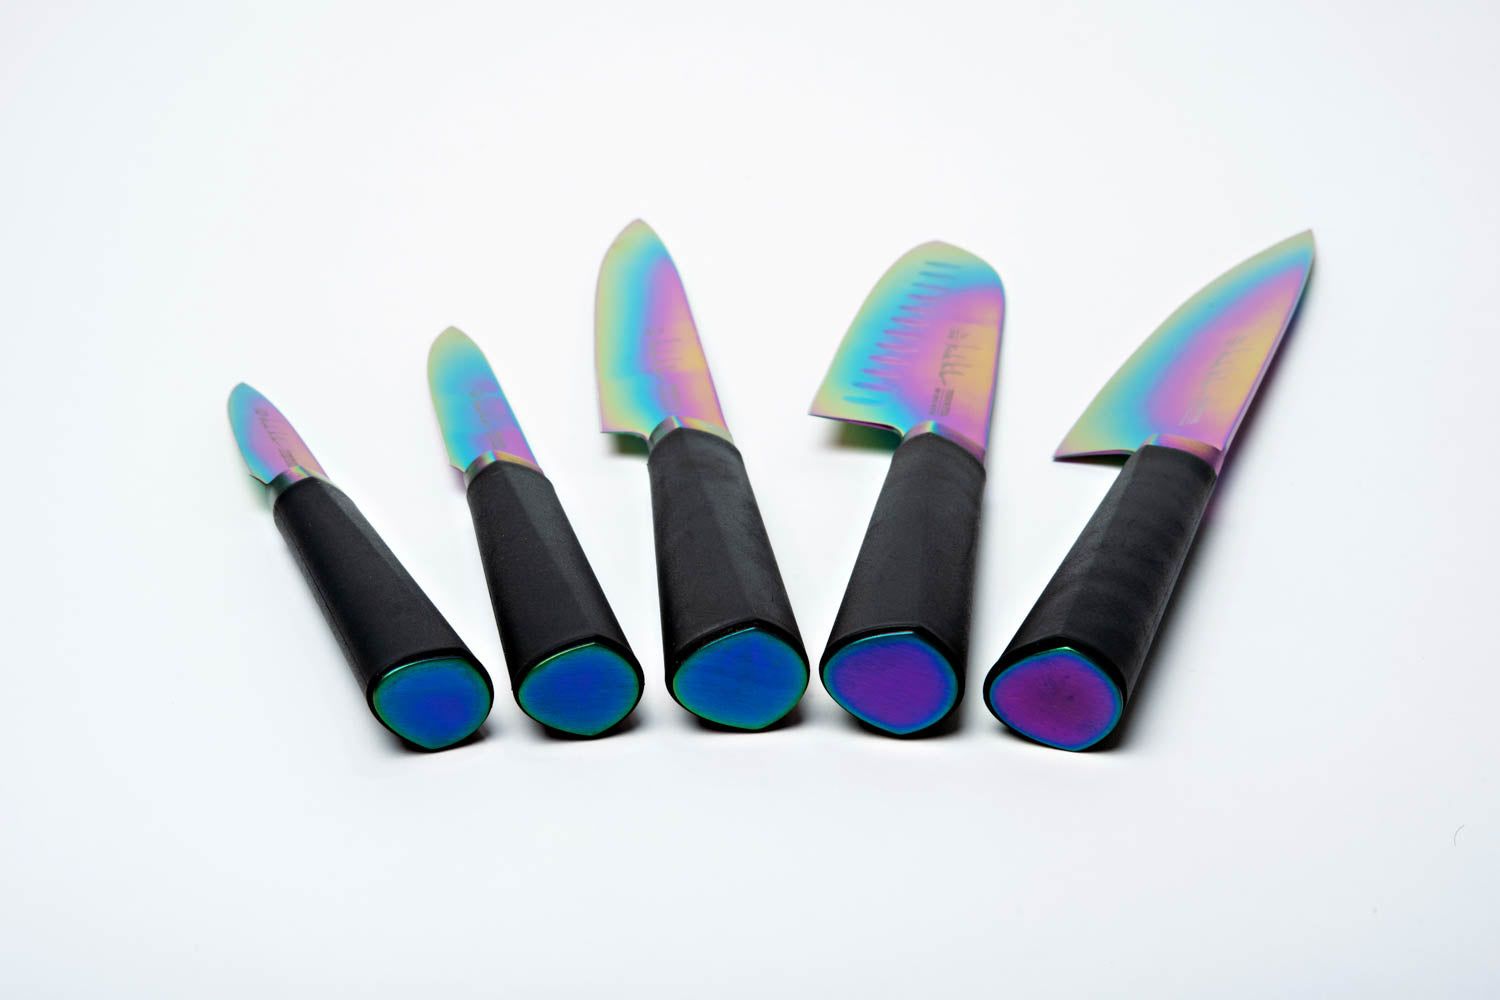 Nicole Miller 6 Piece Knife Set – Chef's Kiss At Home